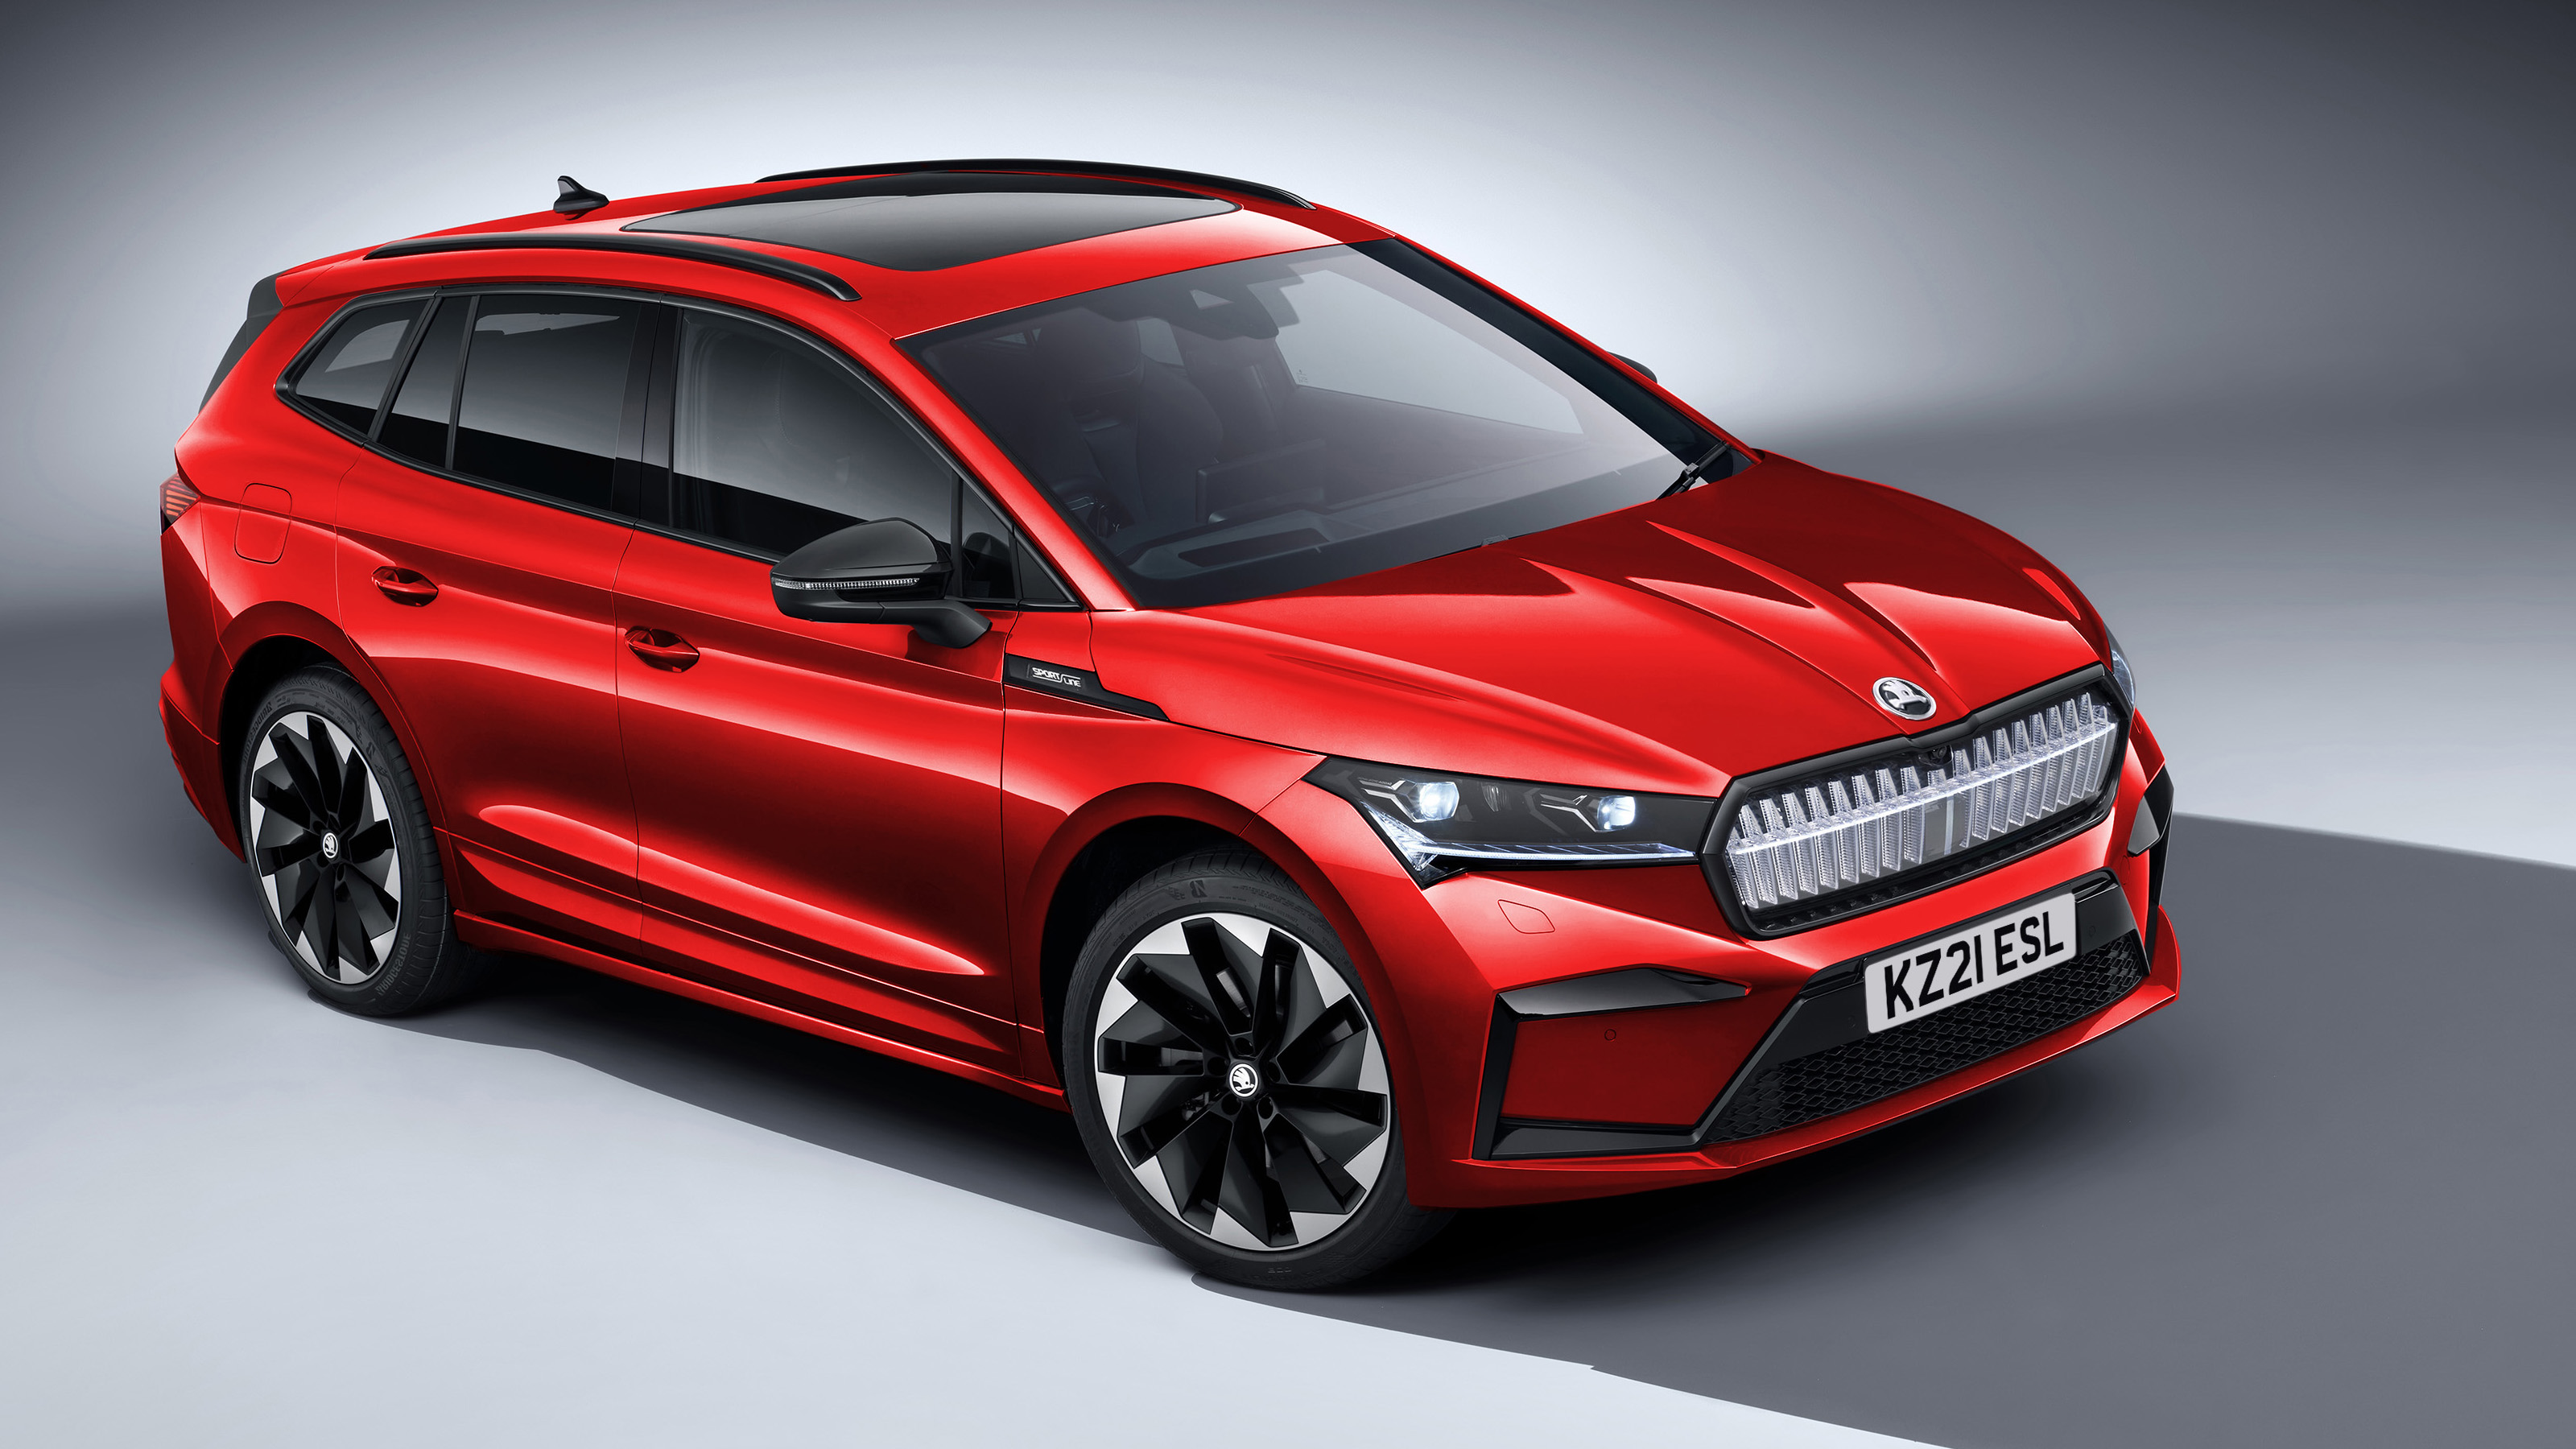 2021 Skoda Enyaq iV electric SUV prices, specification and onsale